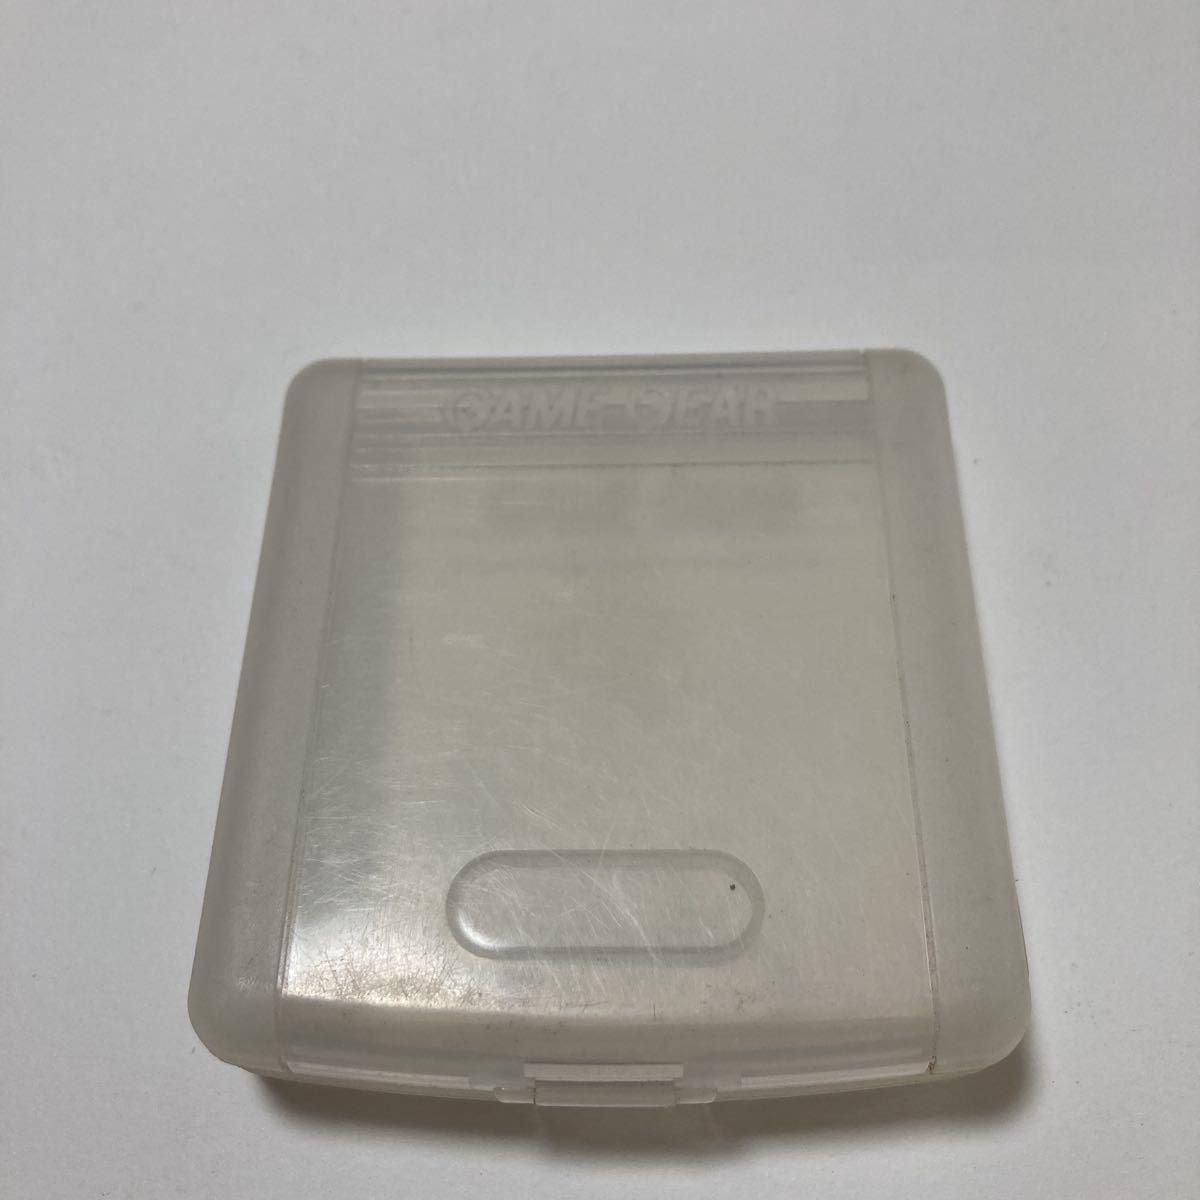  free shipping SEGA Game Gear soft .... operation not yet verification Junk box * manual equipped 